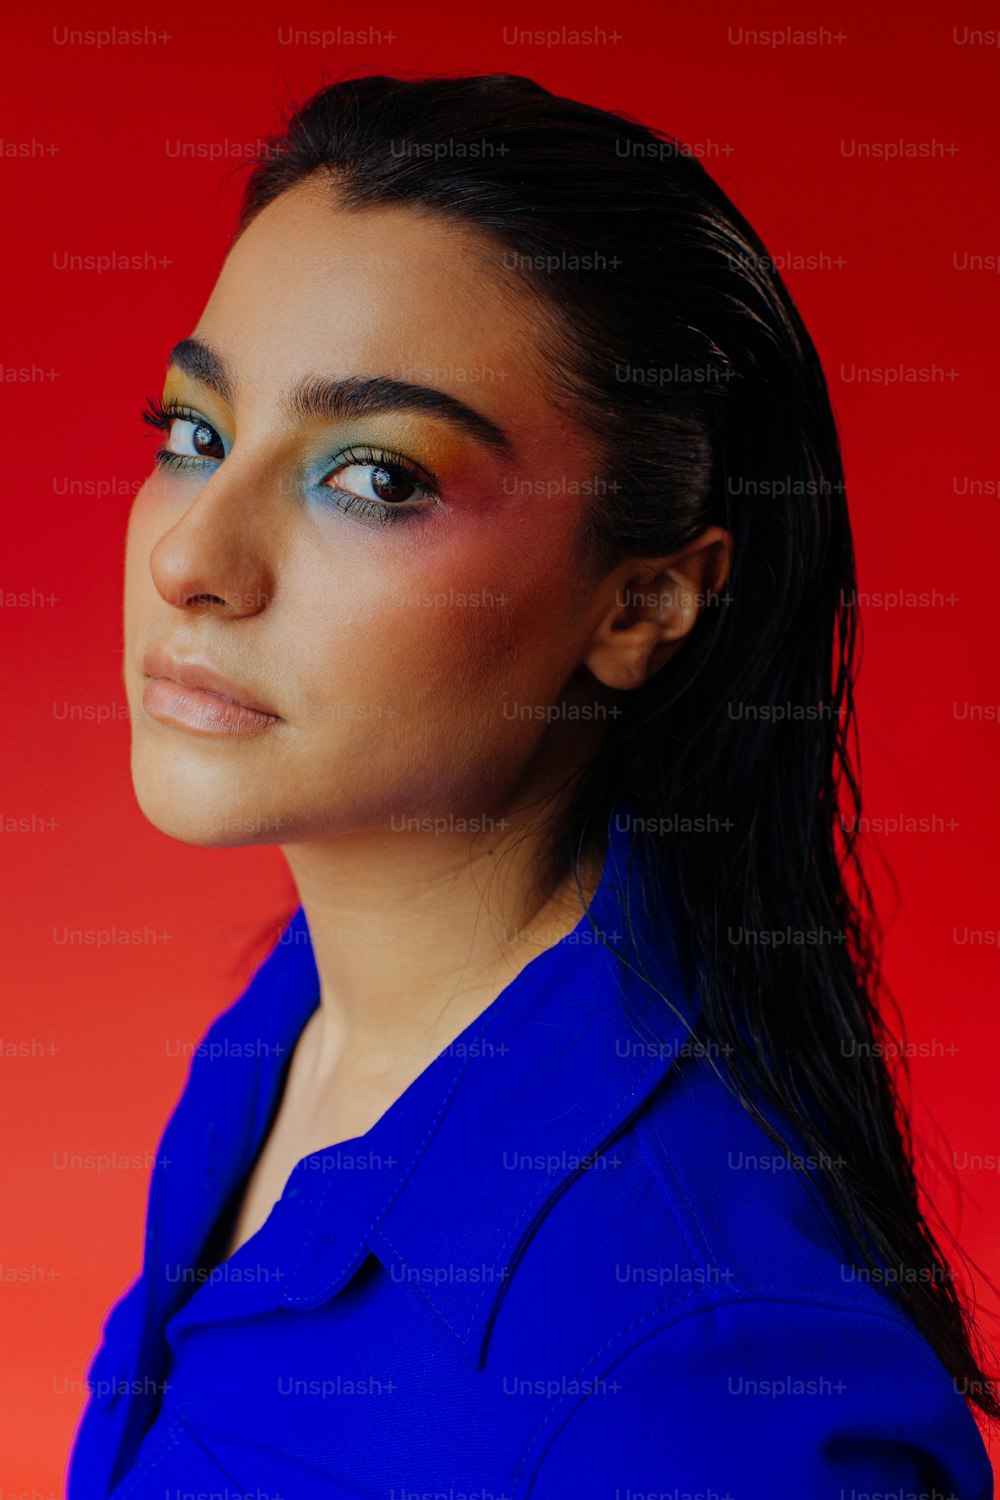 a woman with a blue shirt and a red background